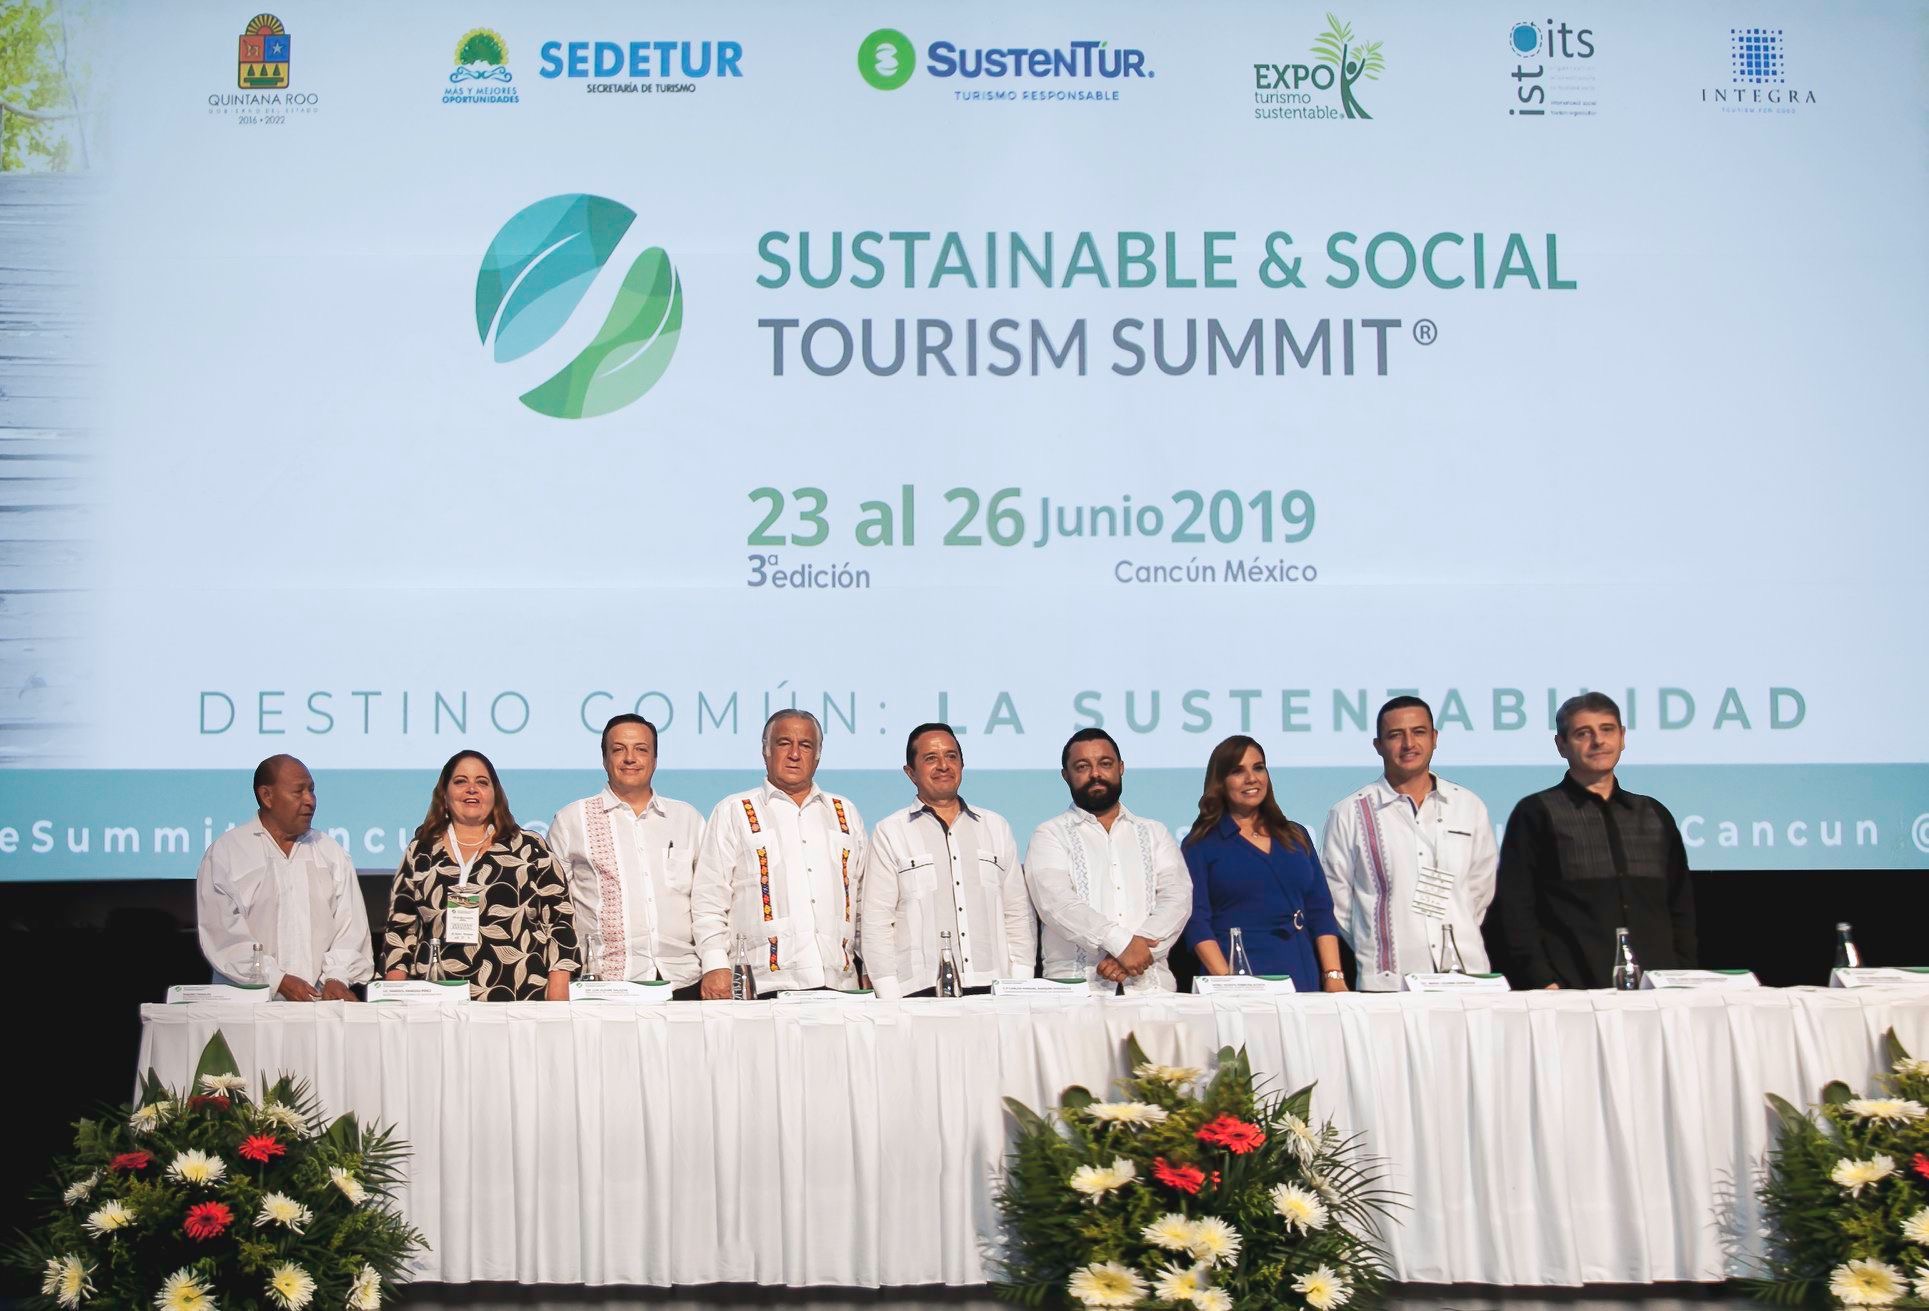 Time to register for the Sustainable & Social Tourism Summit